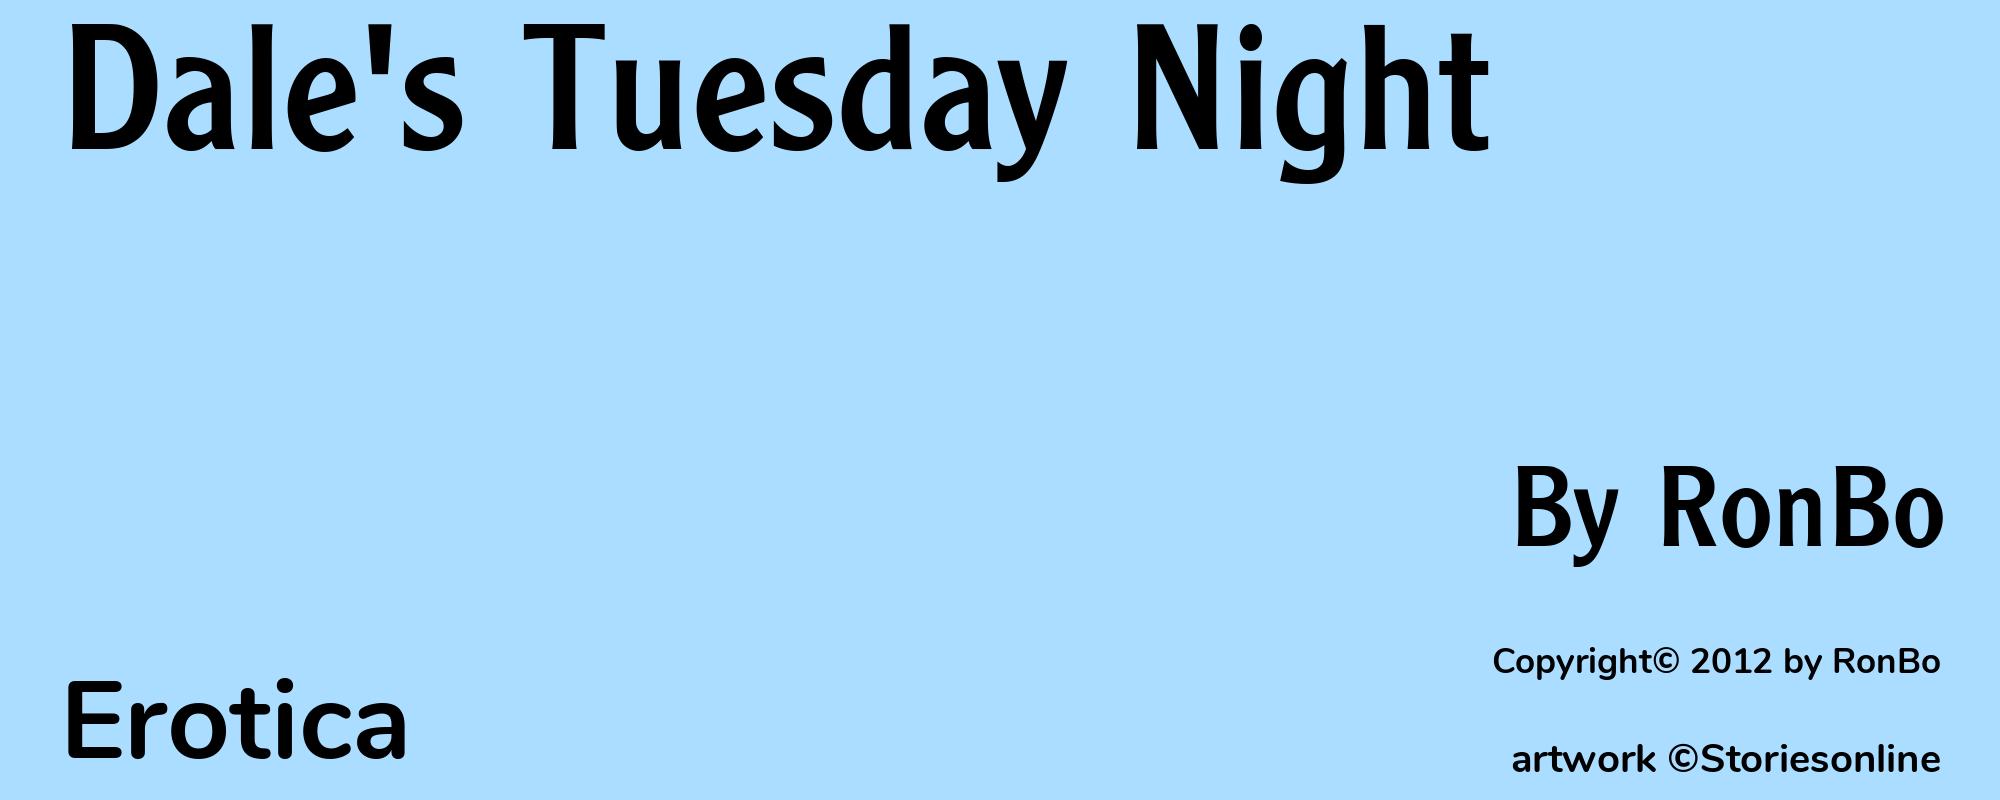 Dale's Tuesday Night - Cover